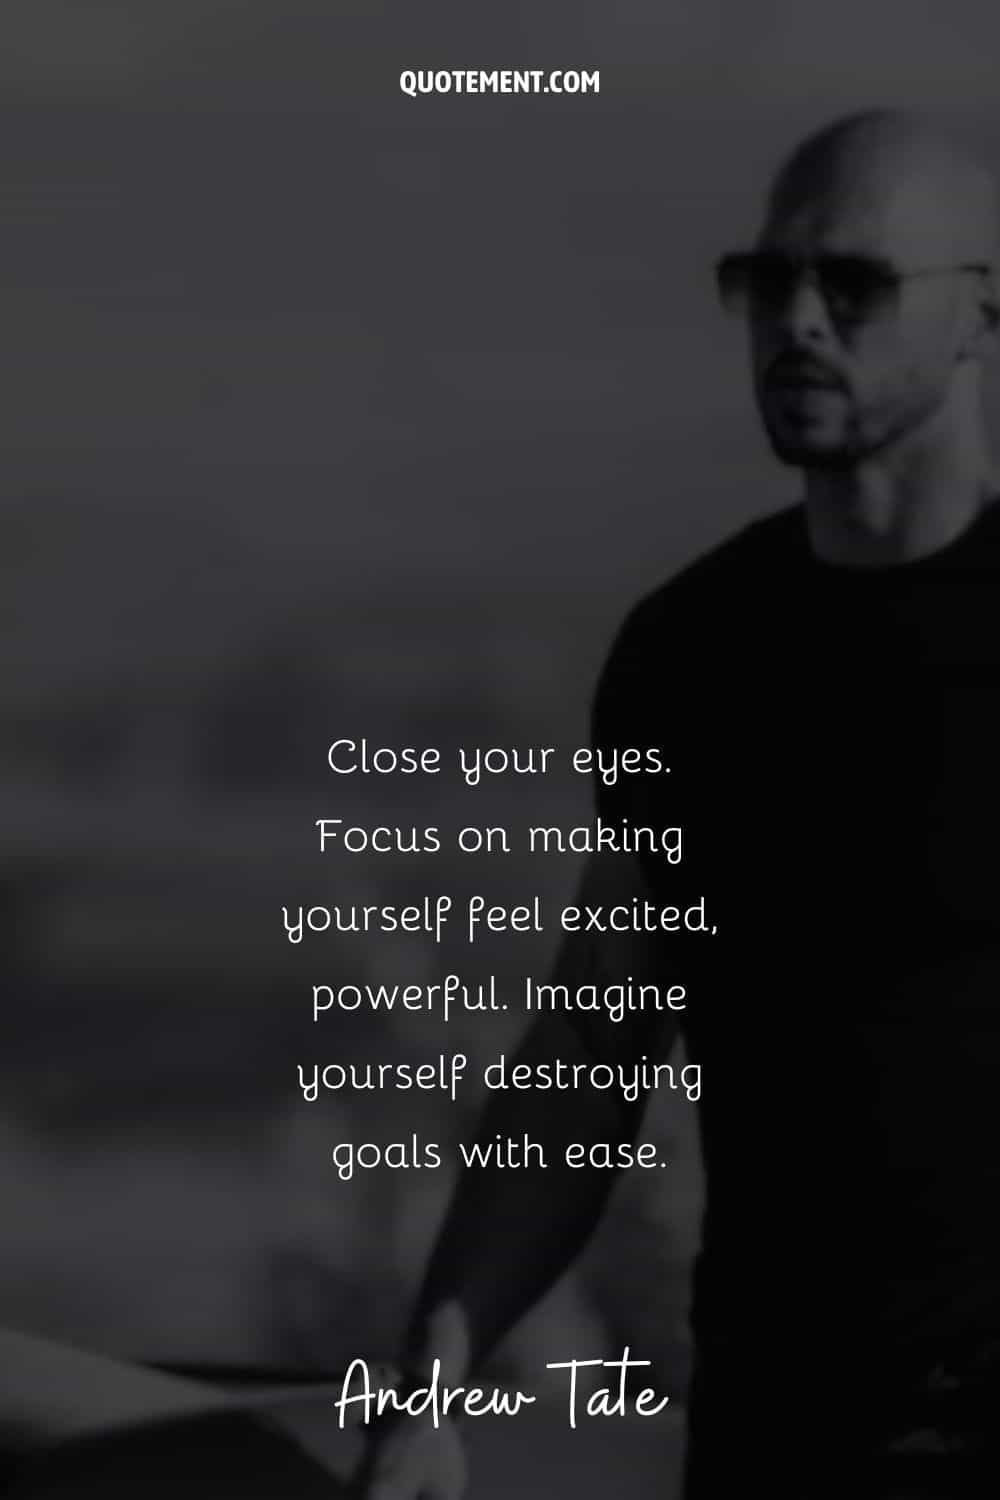 Close your eyes. Focus on making yourself feel excited, powerful